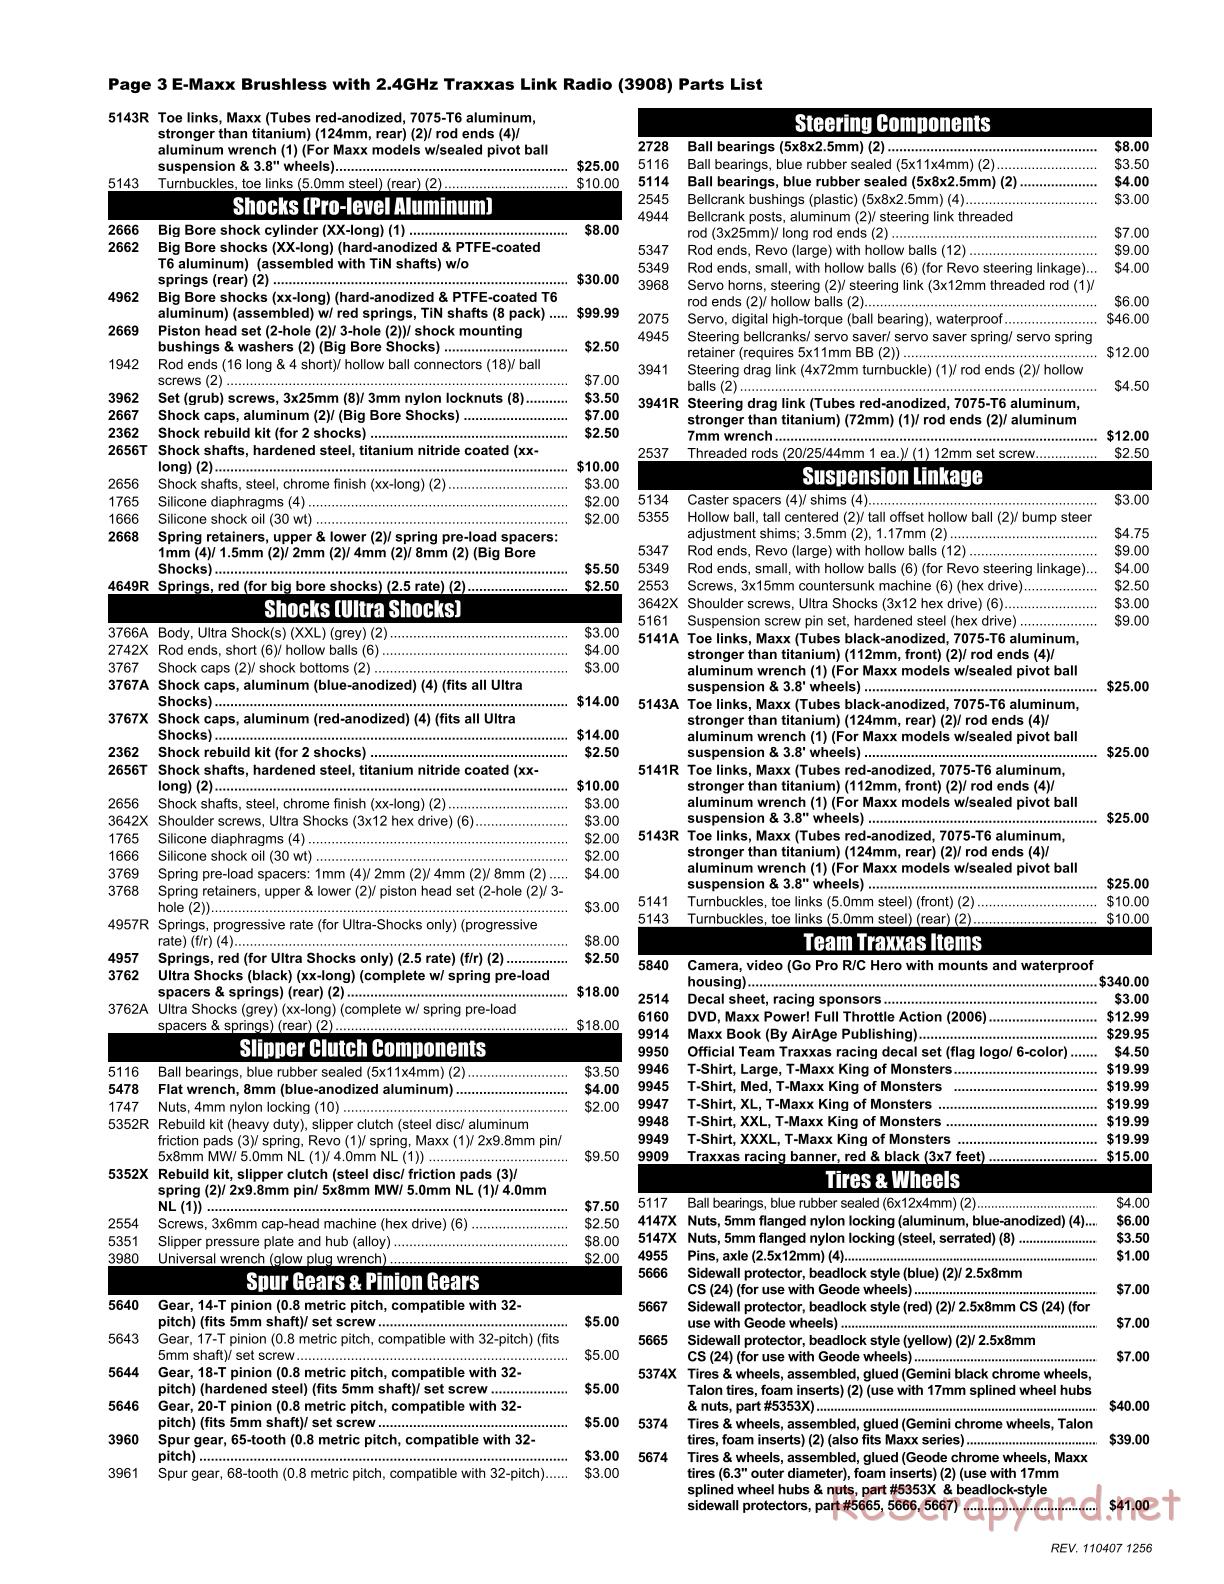 Traxxas - E-Maxx Brushless - Parts List - Page 3